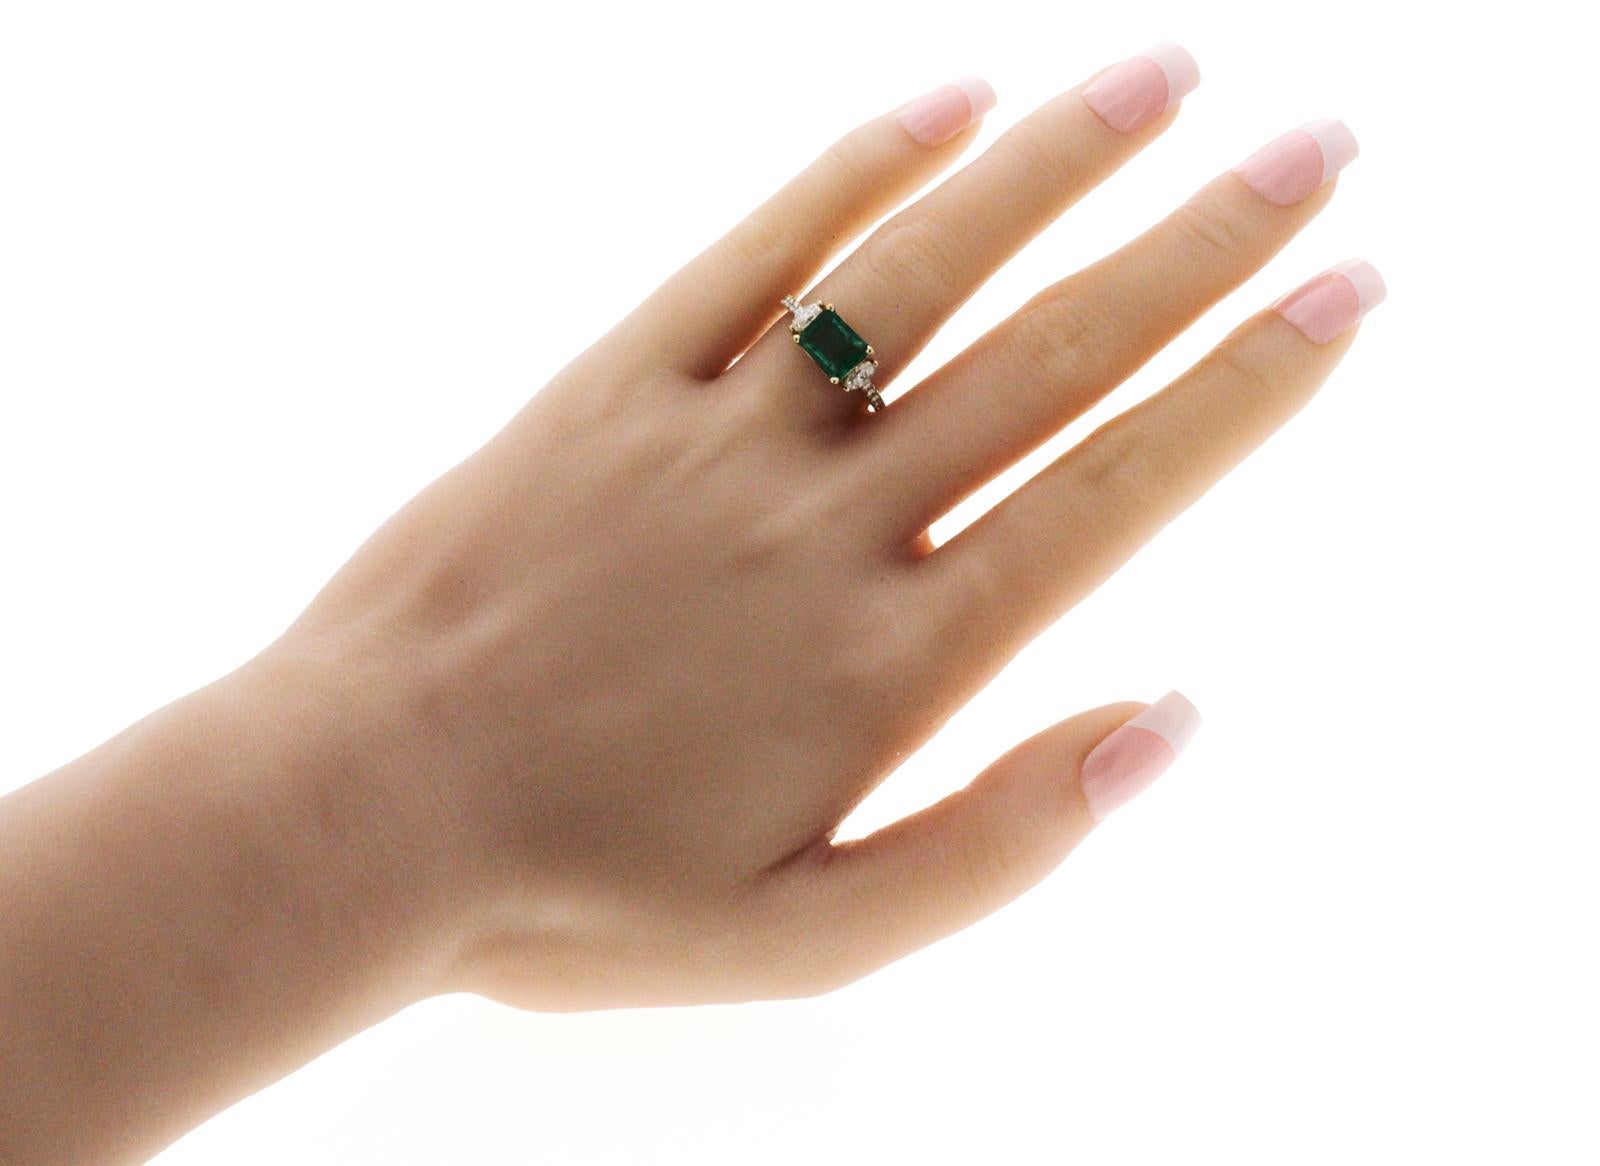 100% Authentic, 100% Customer Satisfaction

Height: 6.5 mm

Width: 2 mm

Size: 7 ( Contact Us for Sizing)

Metal:14K Yellow Gold

Hallmarks: 14K

Total Weight: 2.64 Grams

Stone Type: 1.61 CT Natural Zambian Emerald & 0.67 CT Diamonds

Condition: